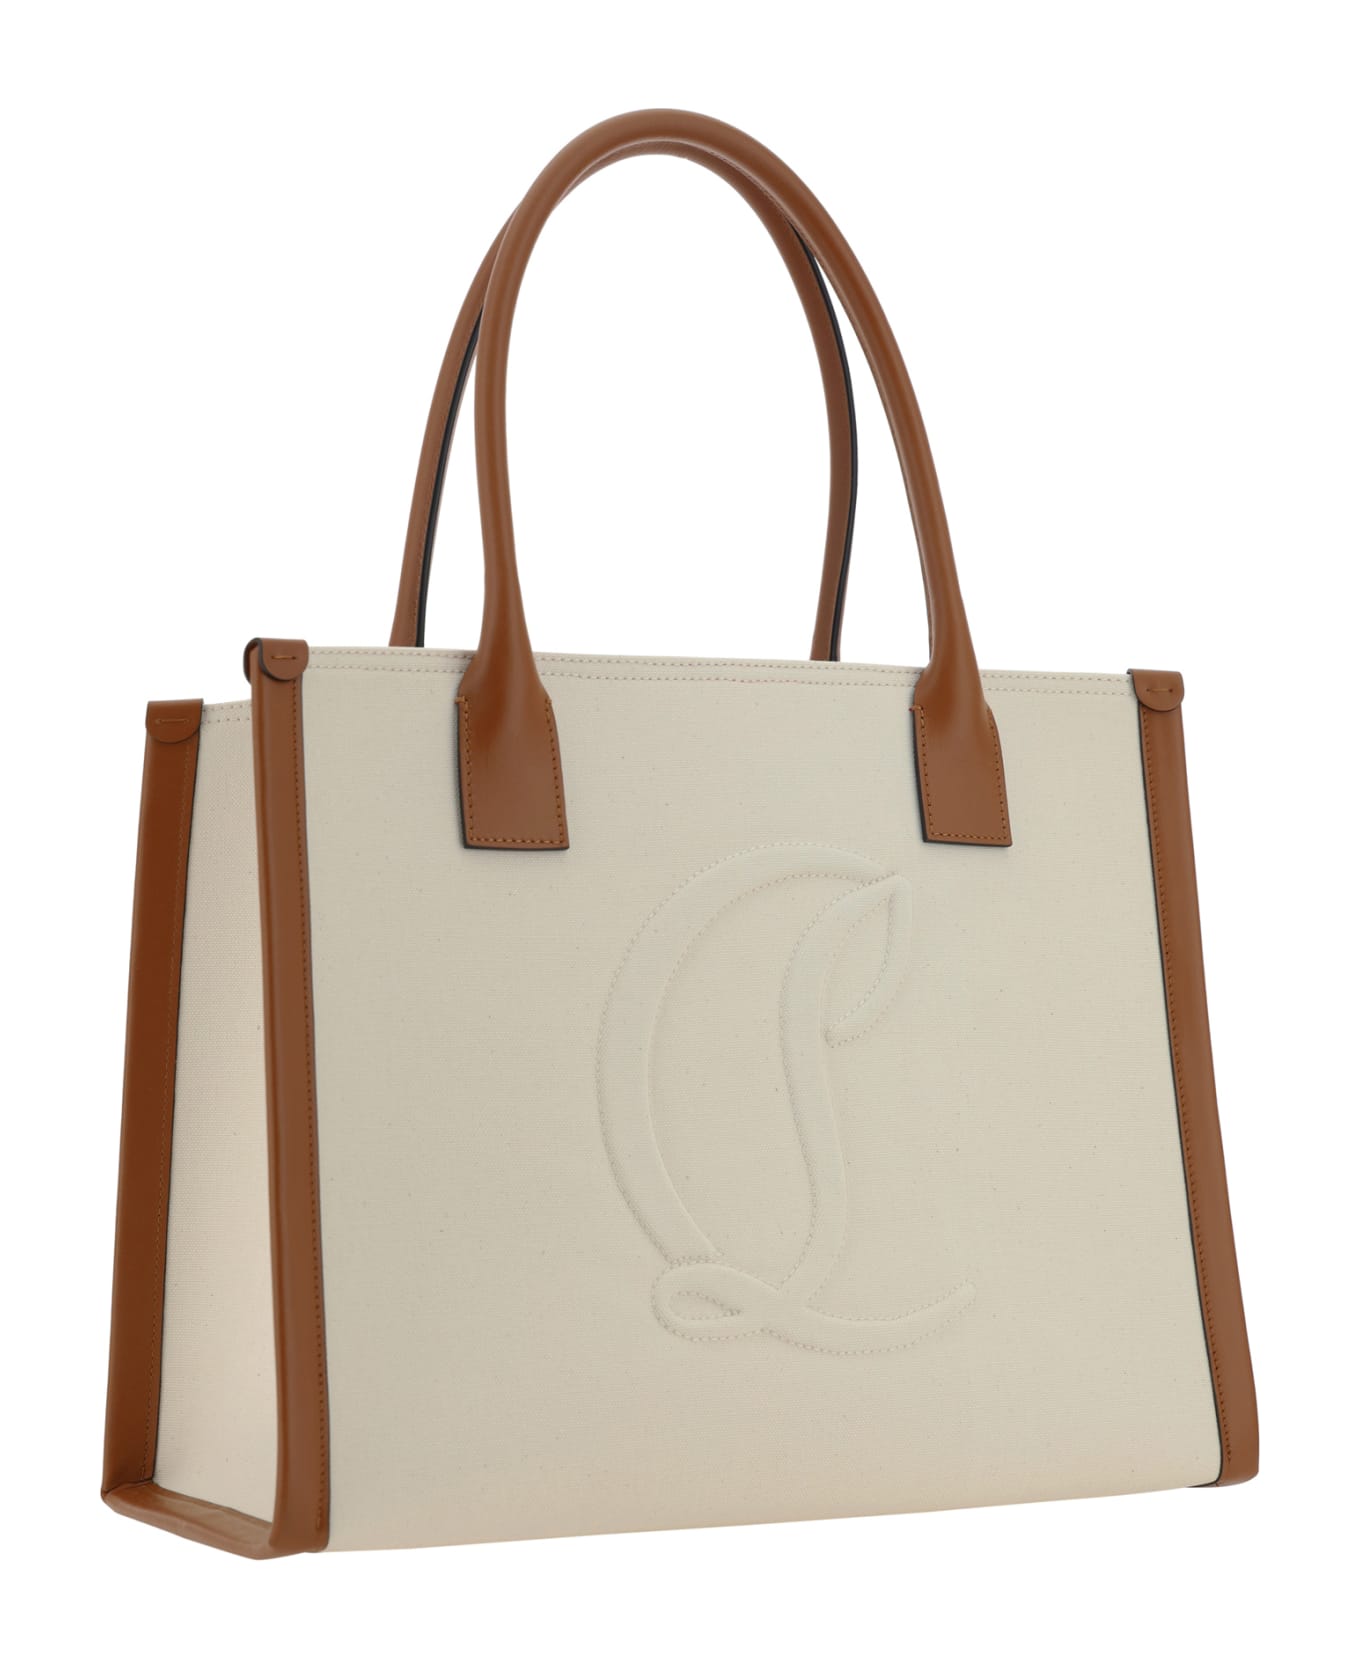 Christian Louboutin By My Side Large Handbag - Natural/cuoio トートバッグ